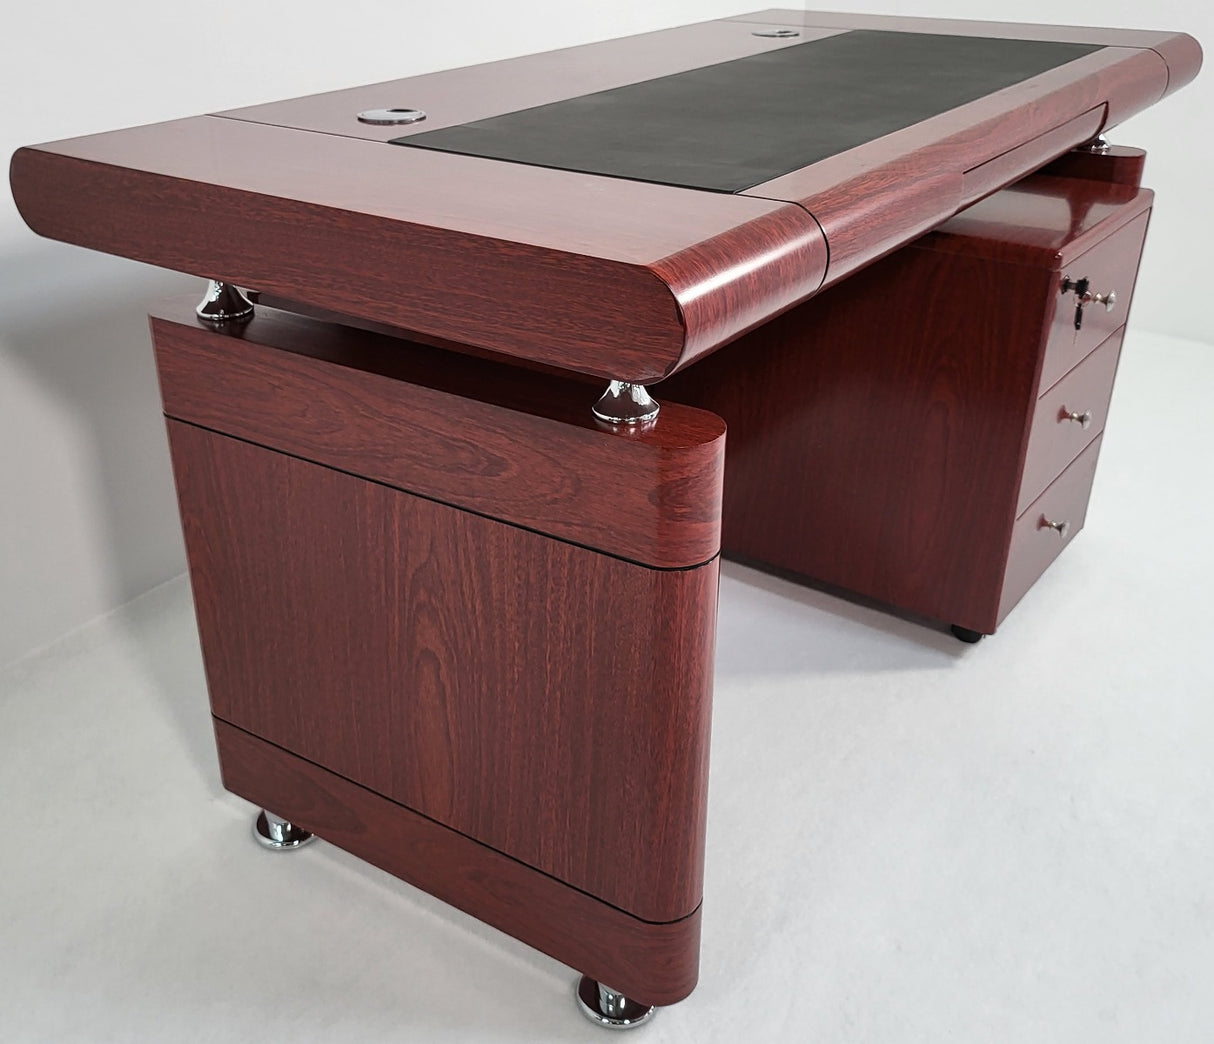 Mahogany Executive Office Desk with Pedestal - KW12B - 1200mm or 1400mm Option